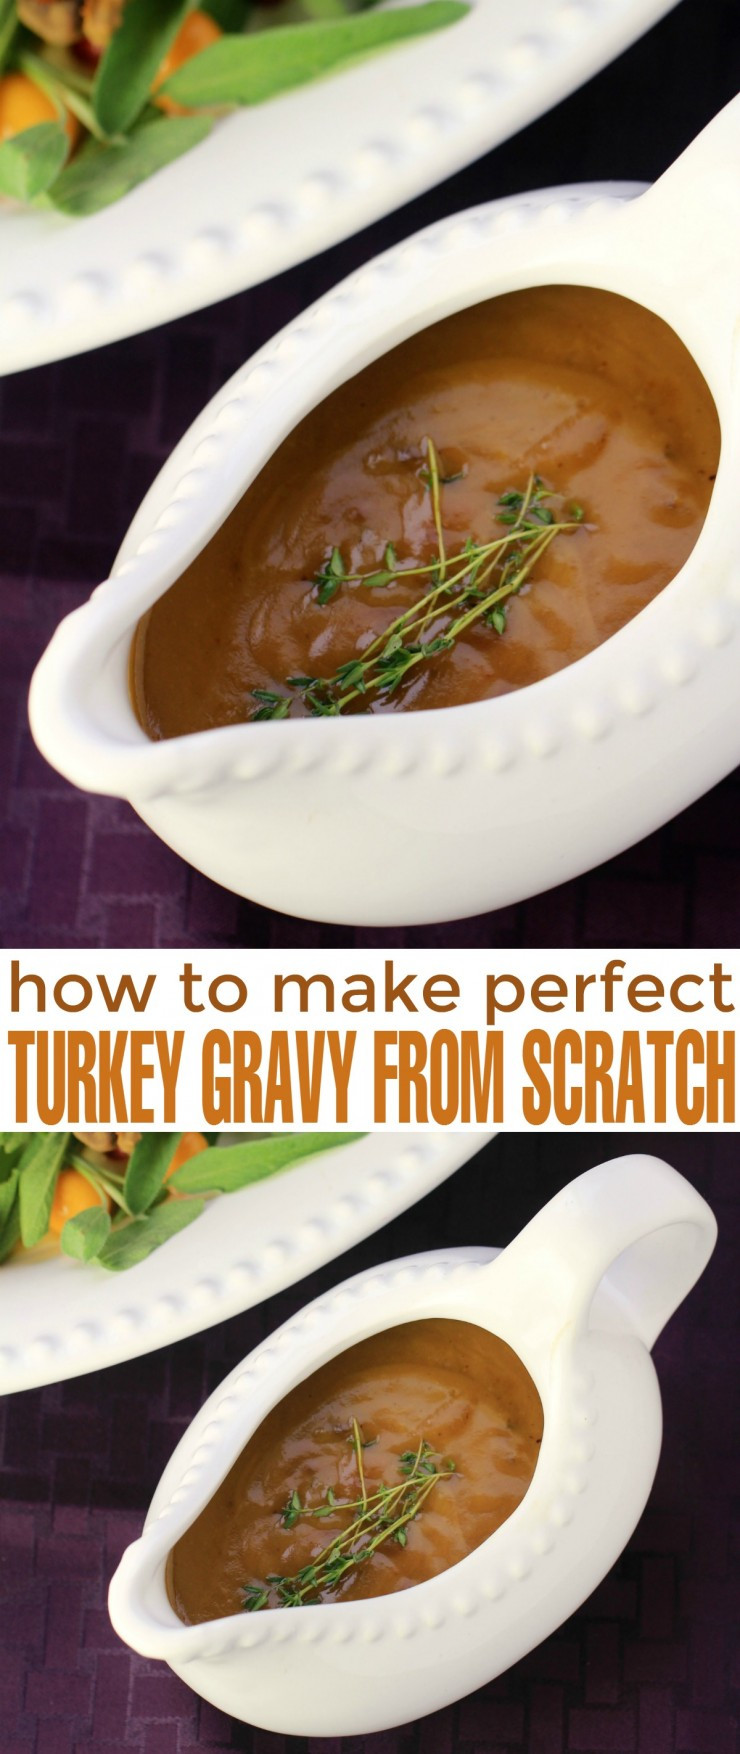 How To Make Turkey Gravy From Drippings
 How to Make Perfect Turkey Gravy from Scratch Life Love Liz